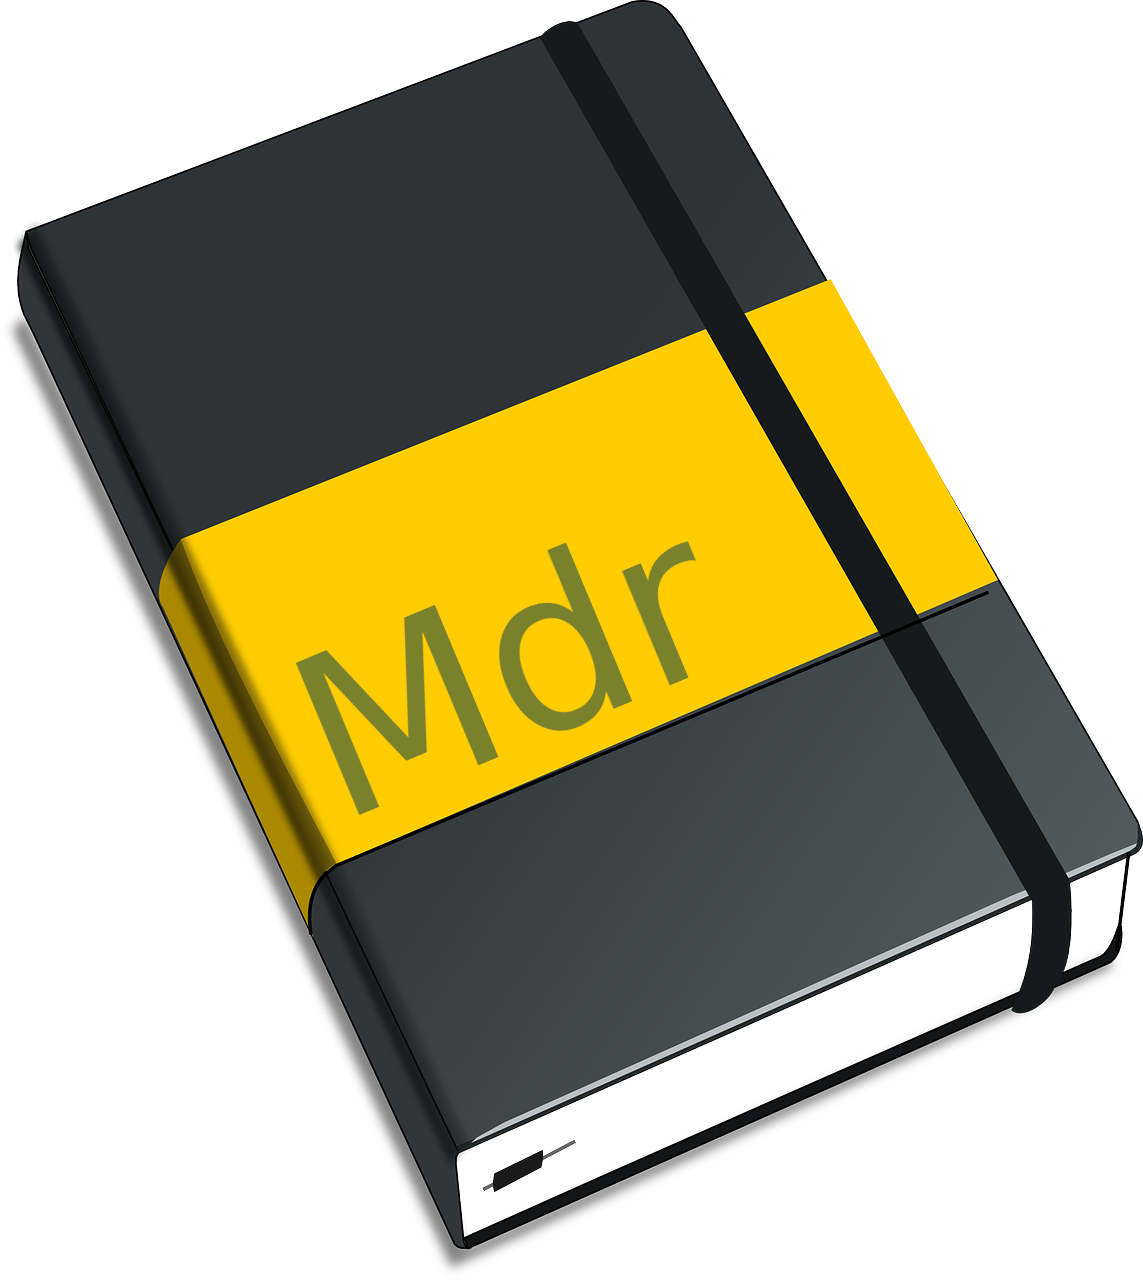 mdr-haskell